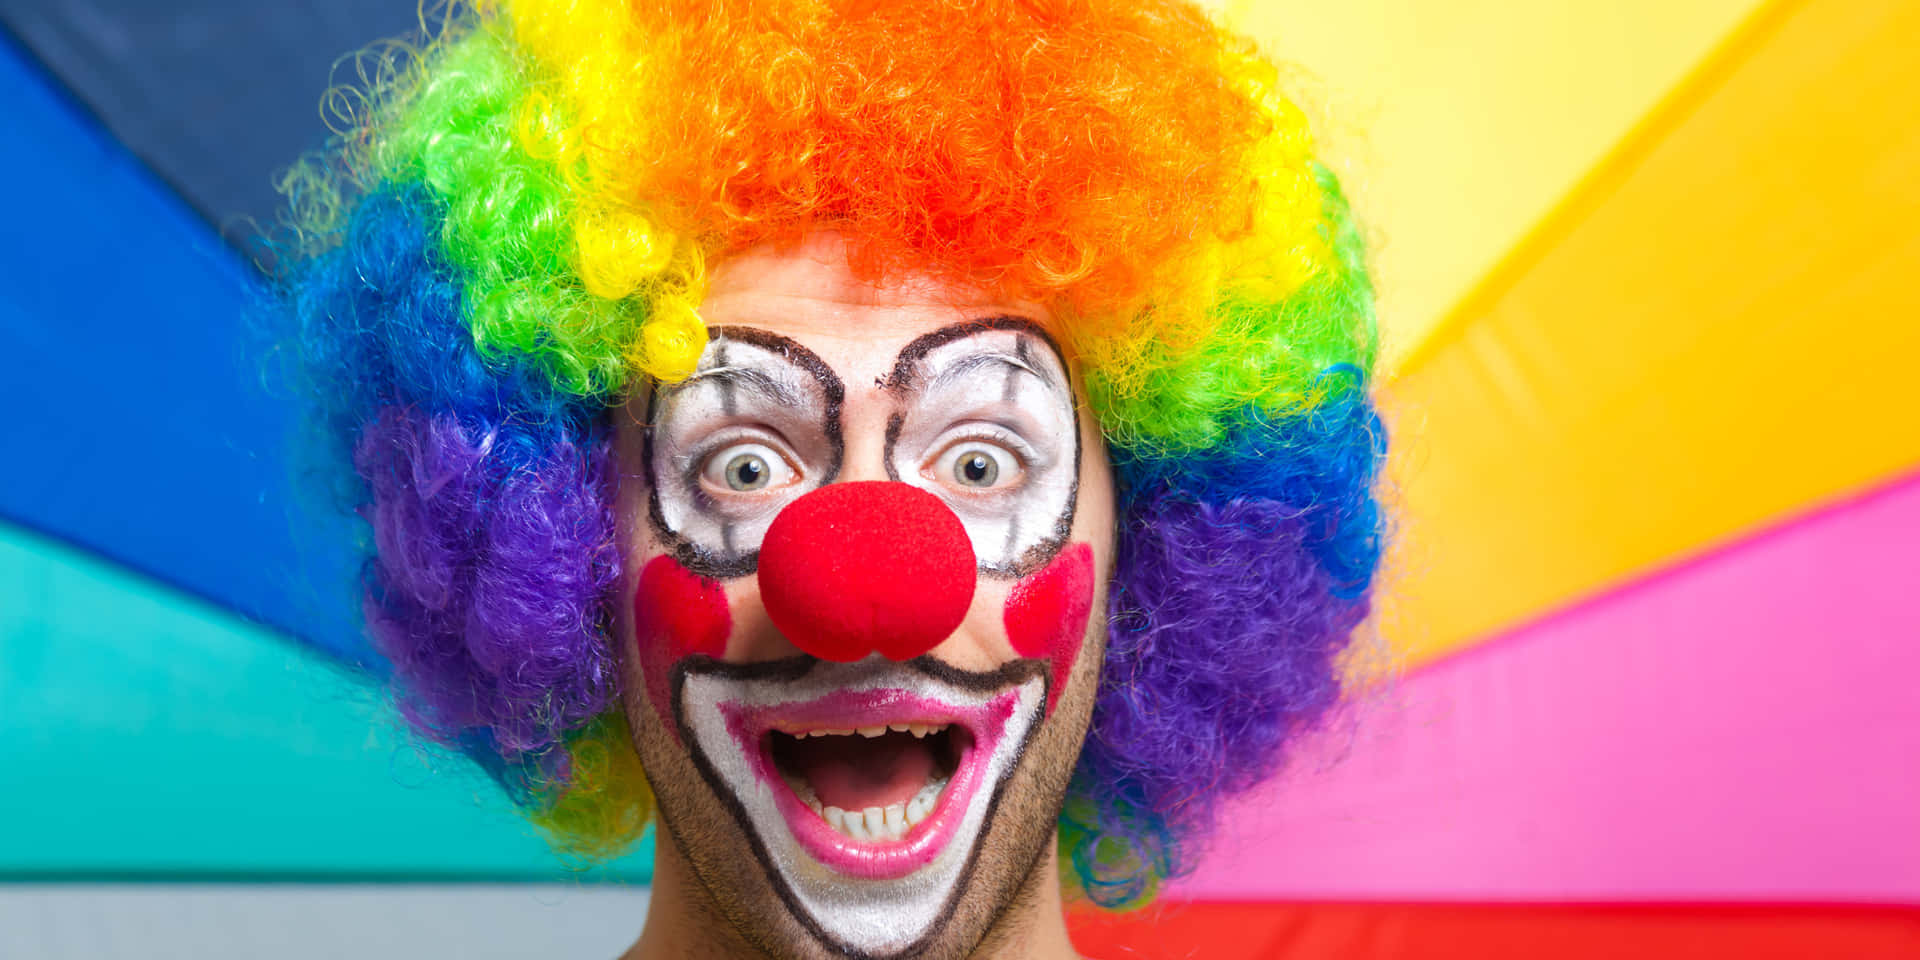 9:16 Windows Funny Clown Pictures